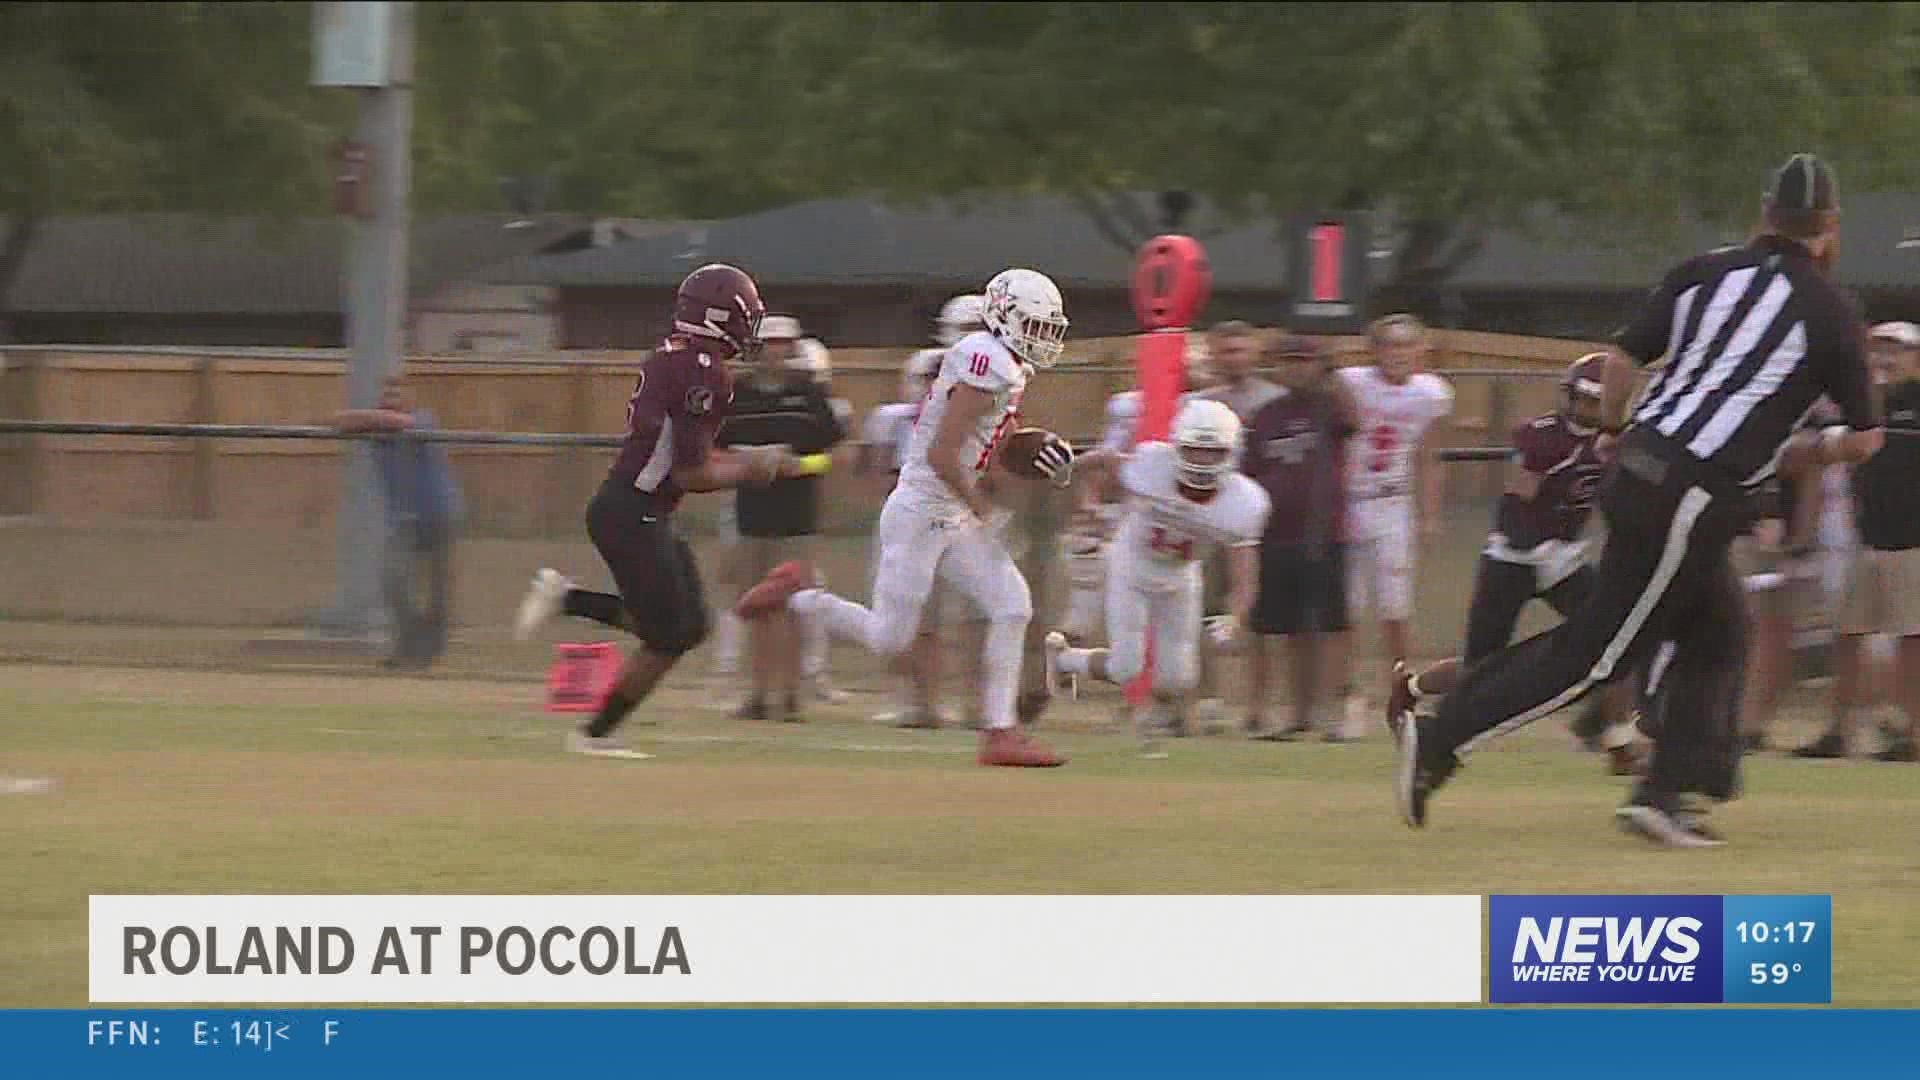 Pocola triumphed over Roland giving them their first loss of the season.